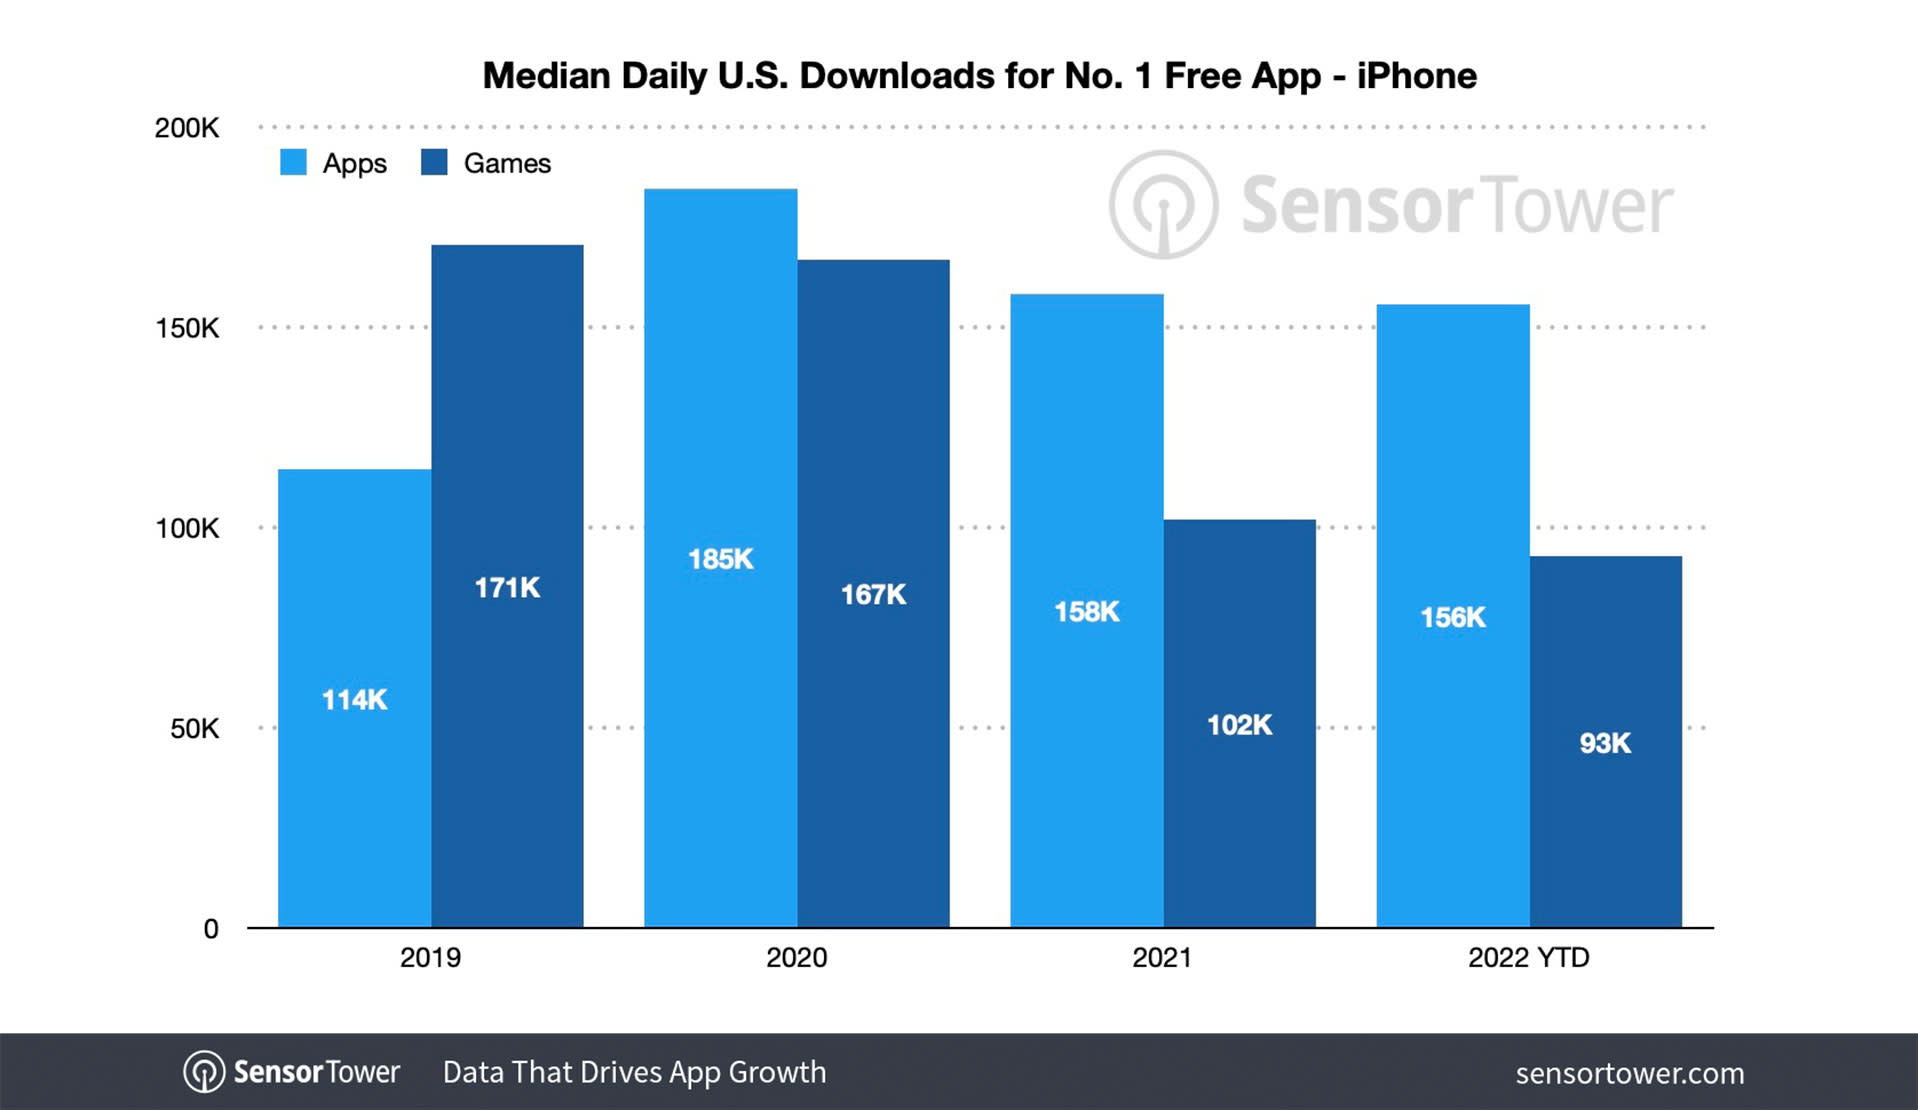 This chart shows median daily downloads needed to be the No. 2 free app, year over year. 